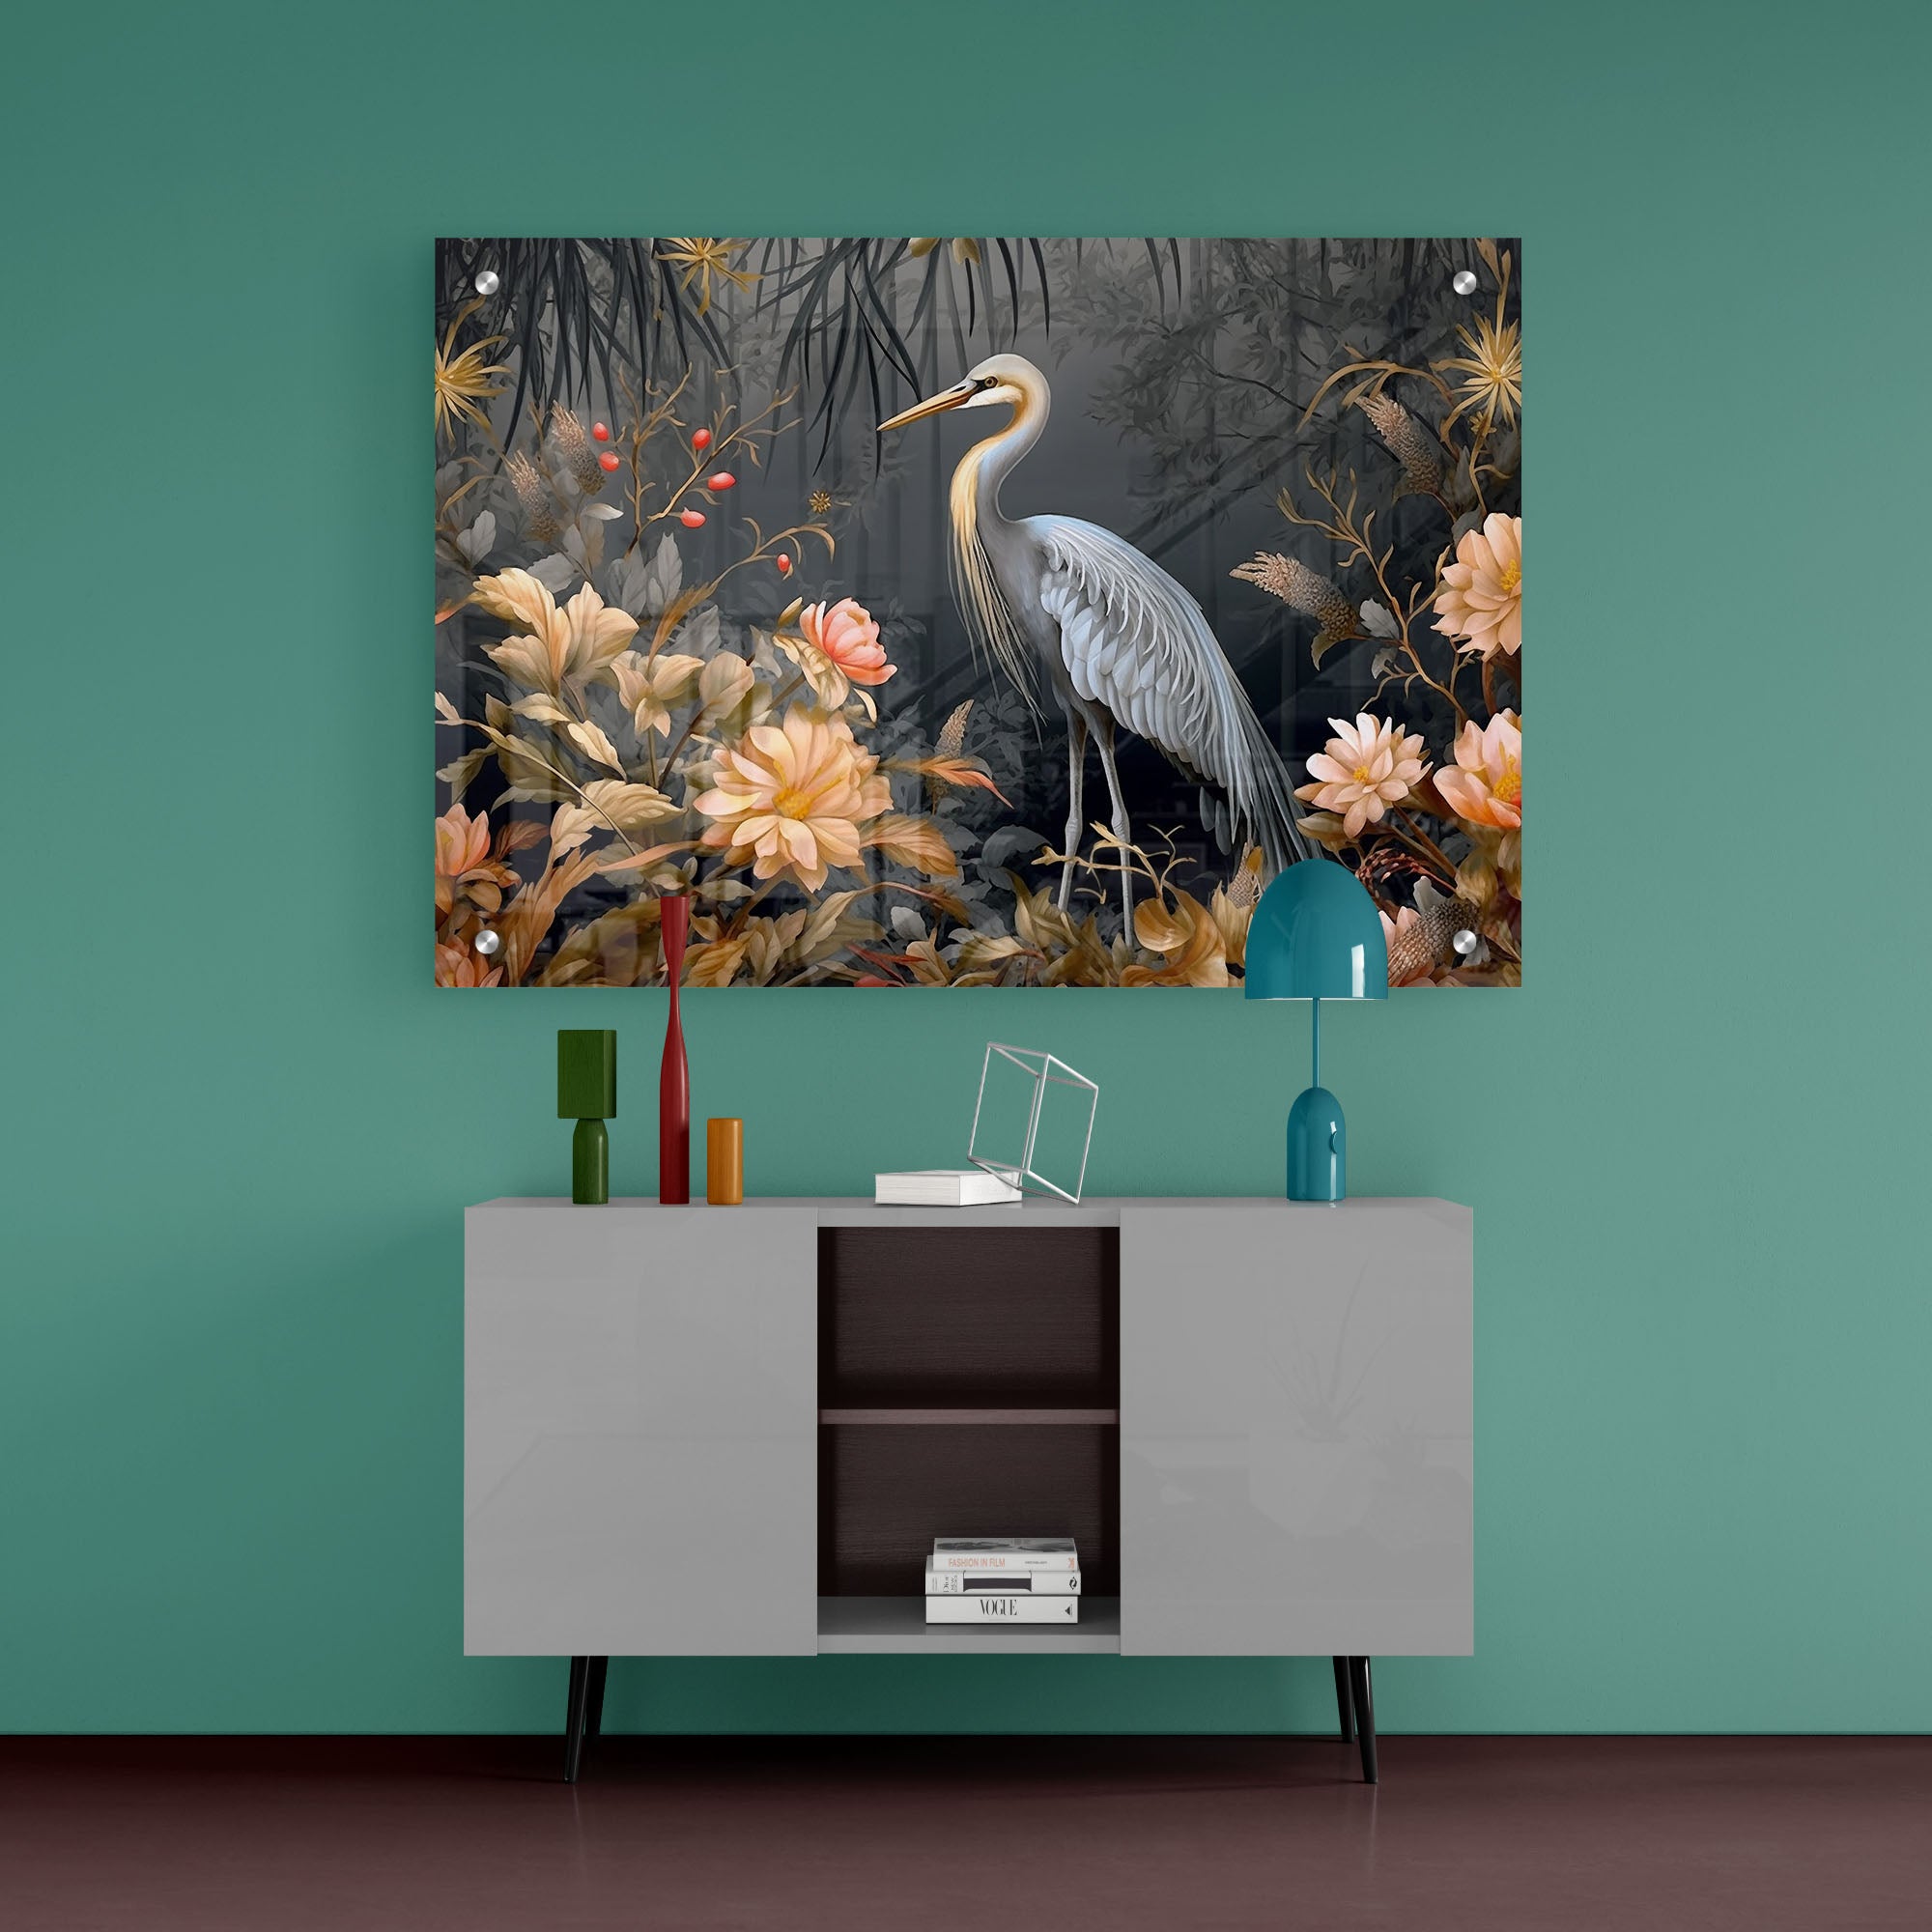 Flowers And Flamingo Acrylic Wall Painting